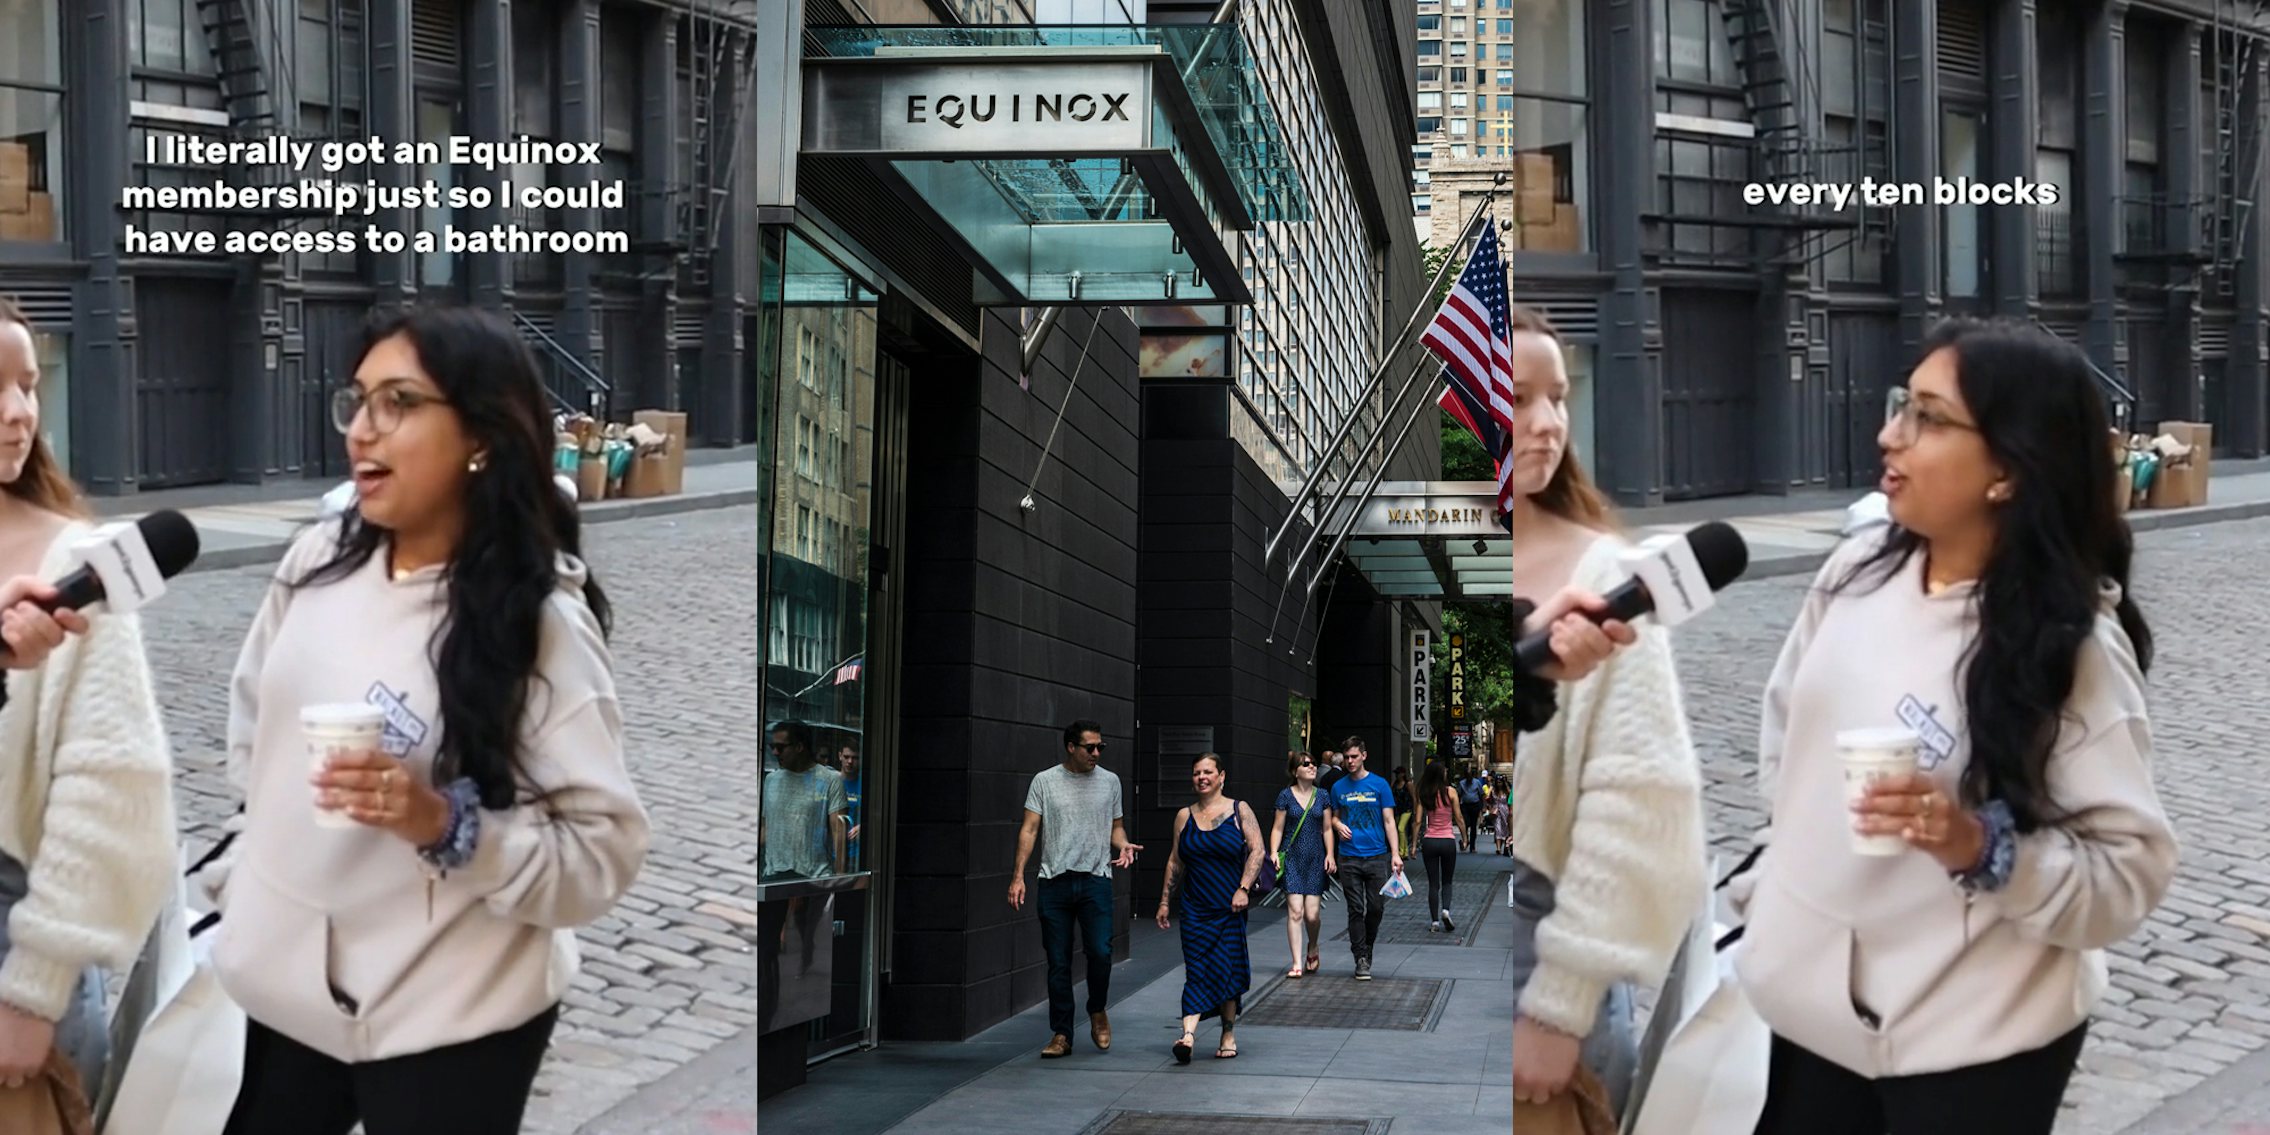 woman speaking into microphone in NYC with caption 'I literally got an Equinox membership just so I could have access to a bathroom' (l) Equinox sign in NYC with people walking on sidewalk (c) woman speaking into microphone in NYC with caption 'every ten blocks' (r)